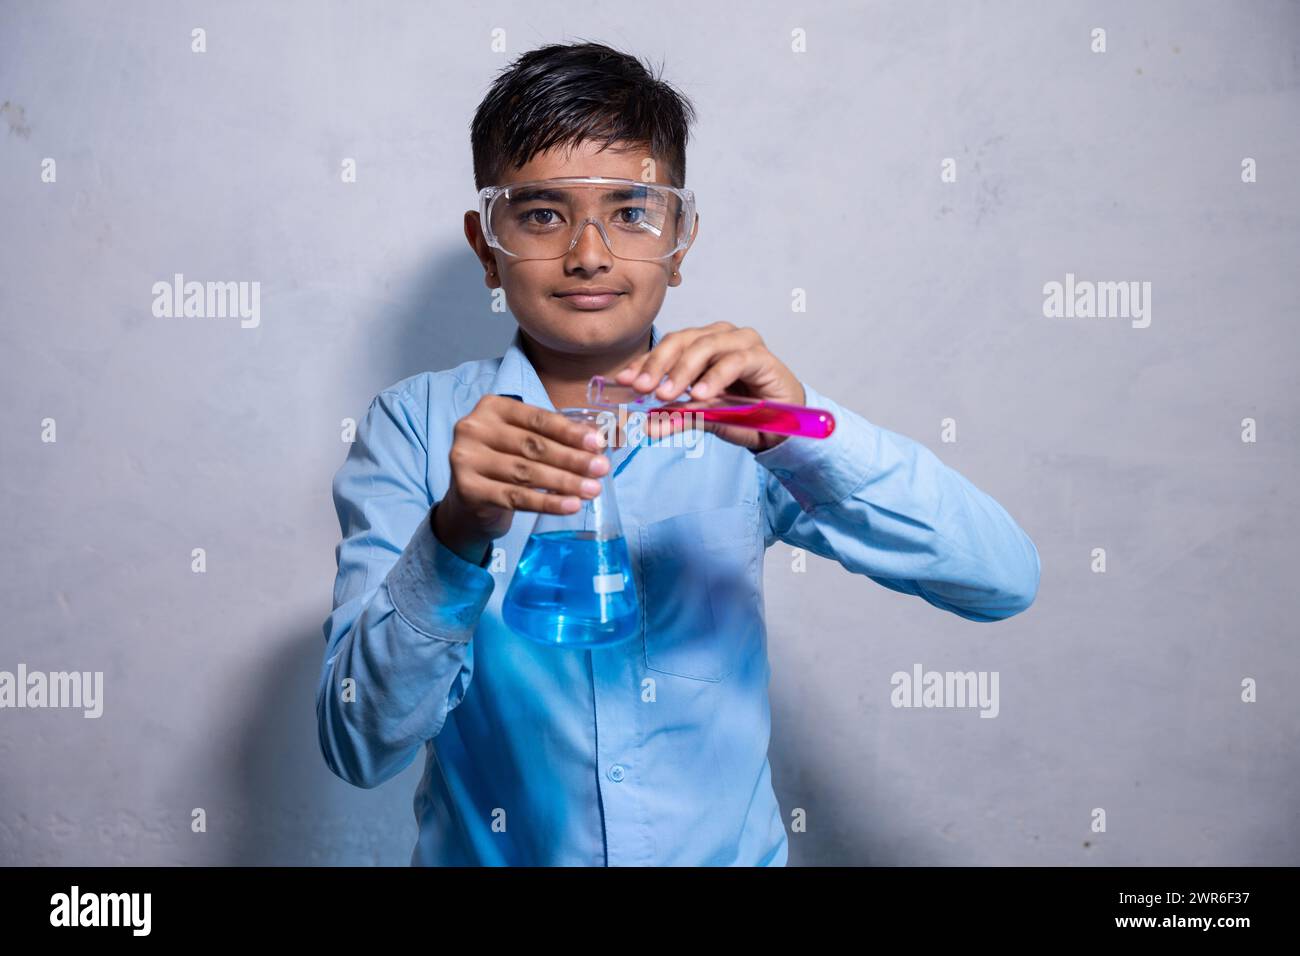 Happy Young Indian boy in school uniform wearing safety lab goggles while working on his chemistry project experiment with test tube and conical flask Stock Photo